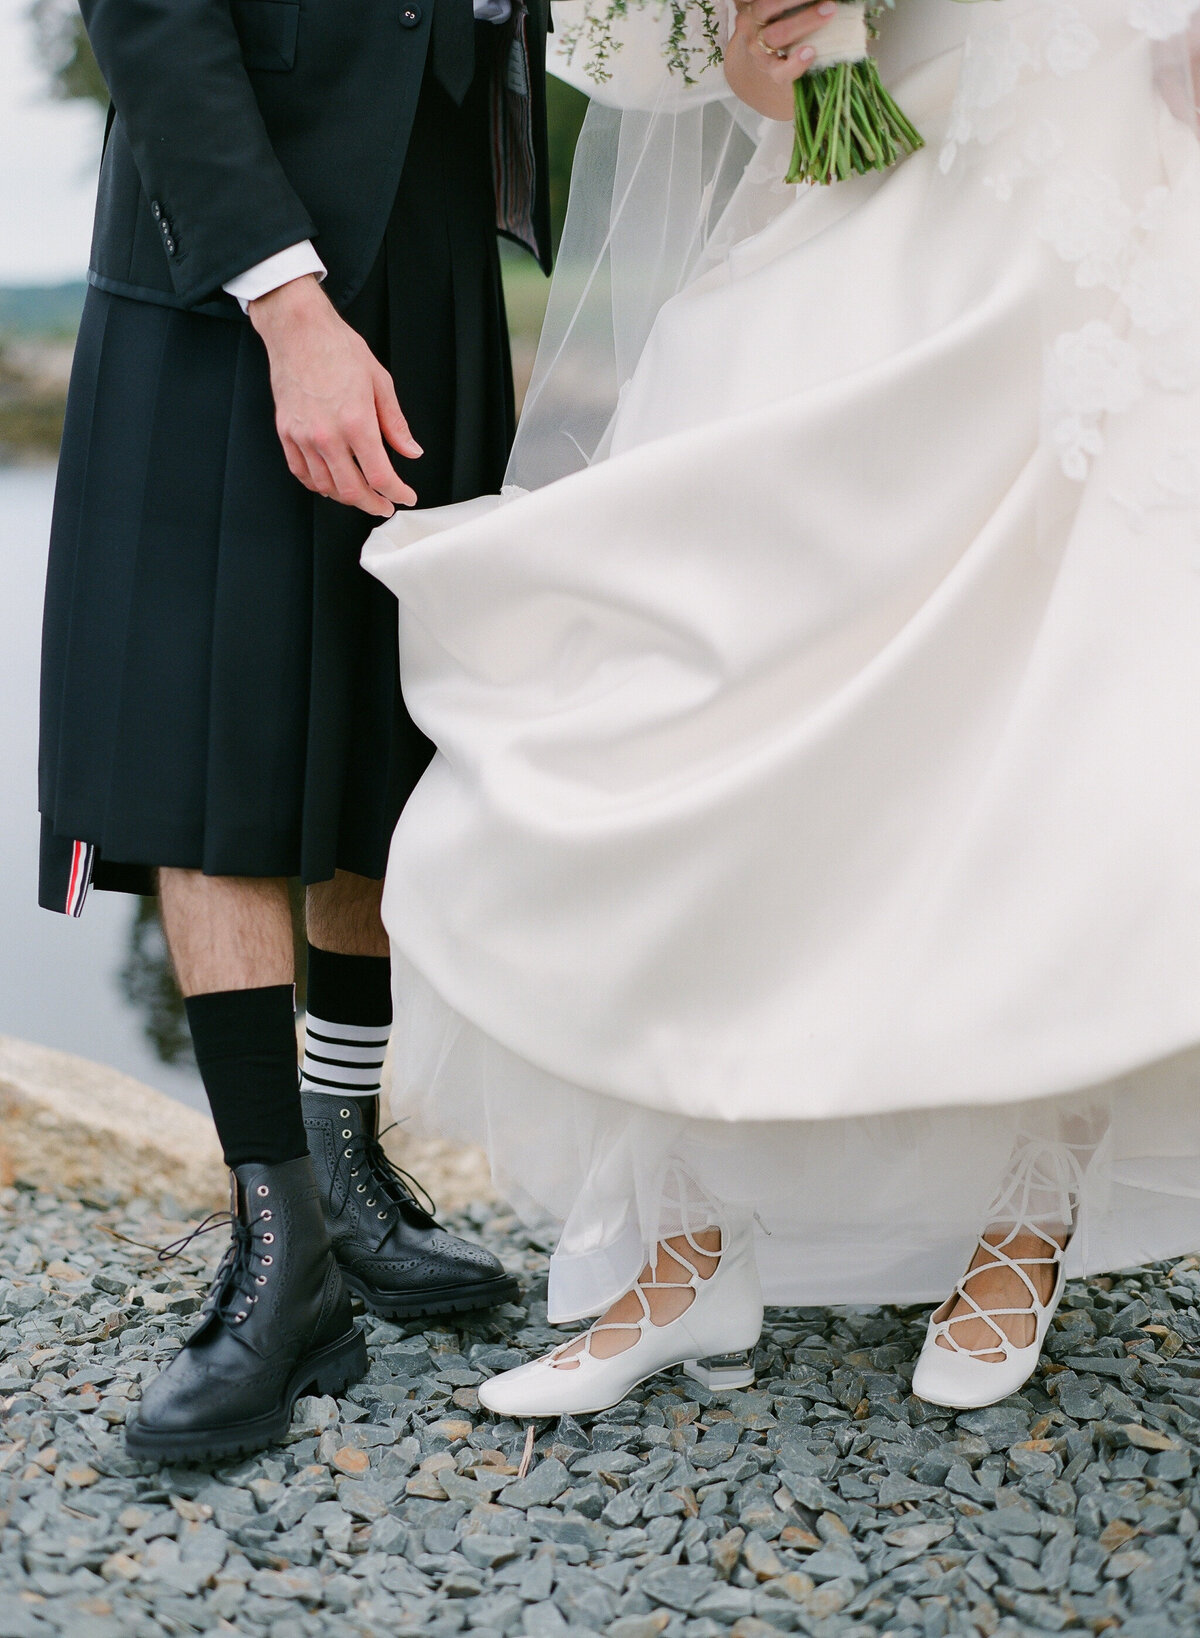 Jacqueline Anne Photography - Halifax Wedding Photographer - Lizzie and Miles-58